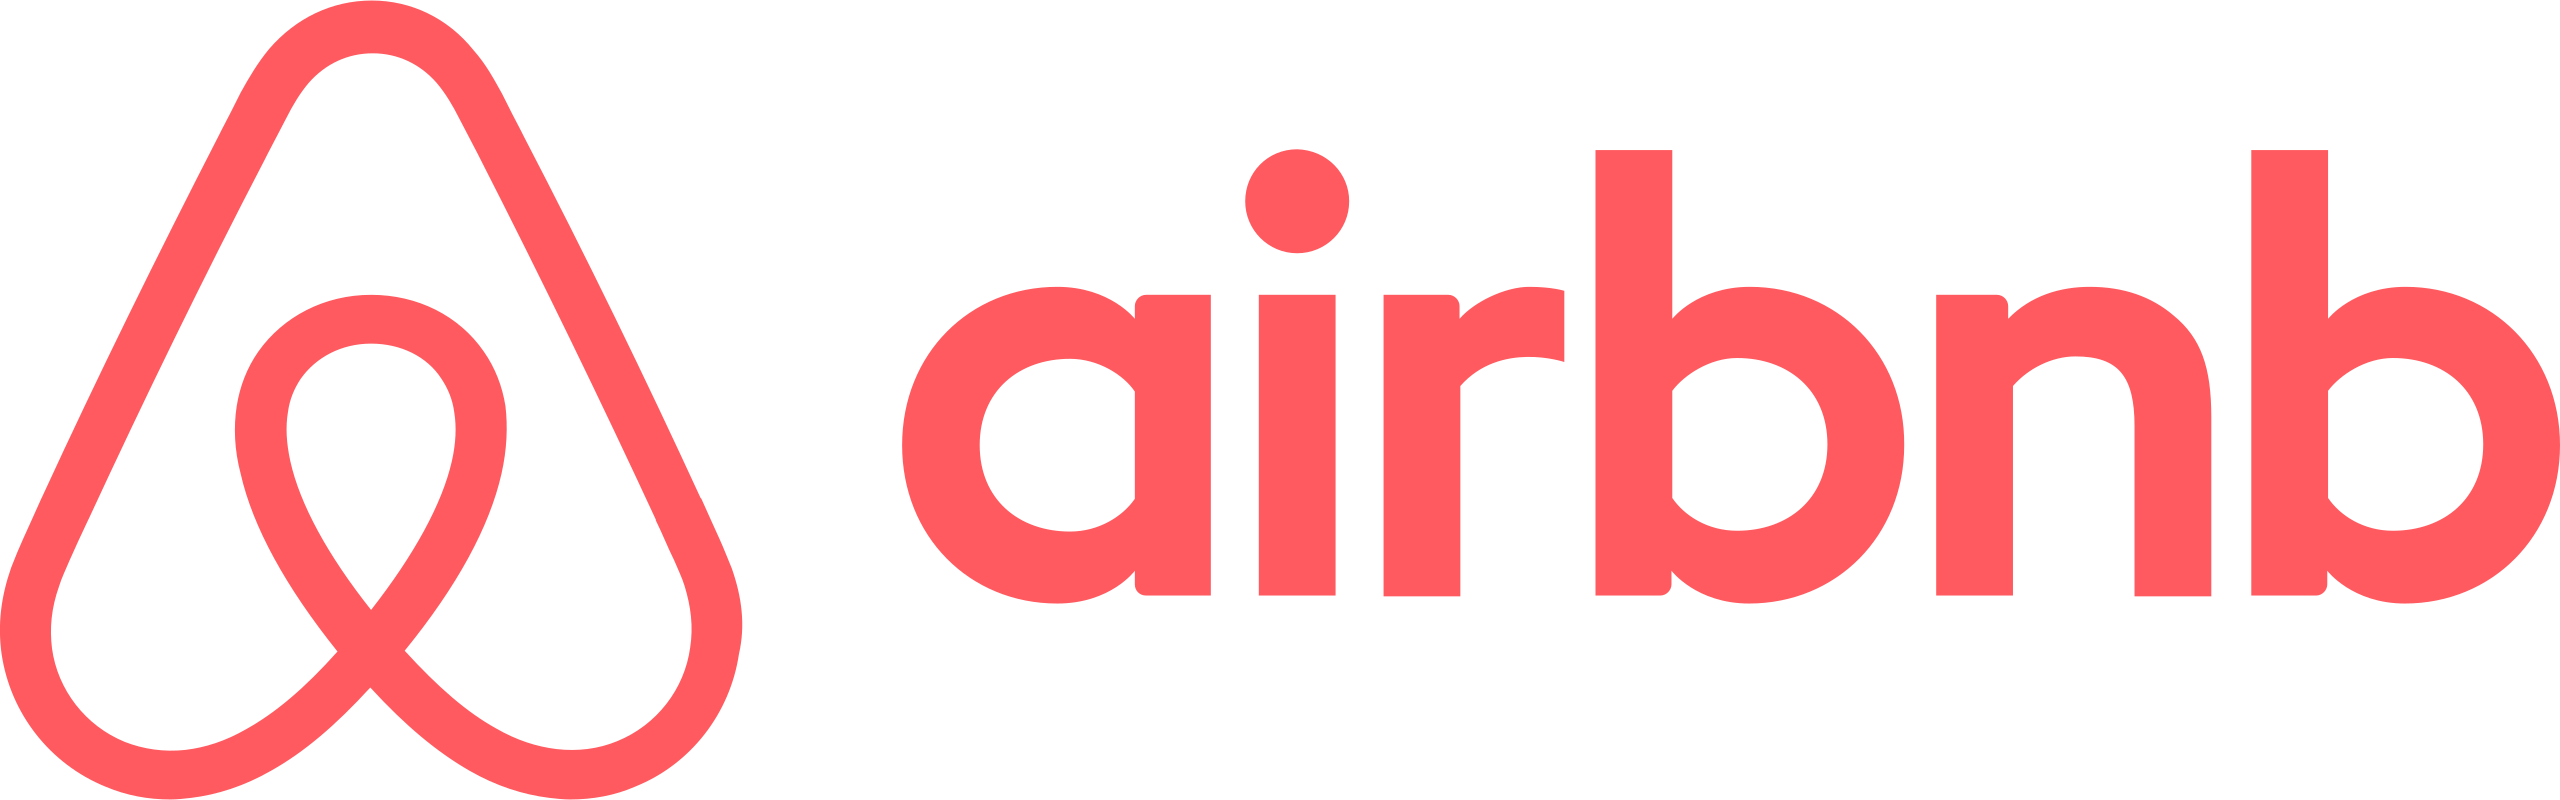 Airbnb-Logo.svg.png